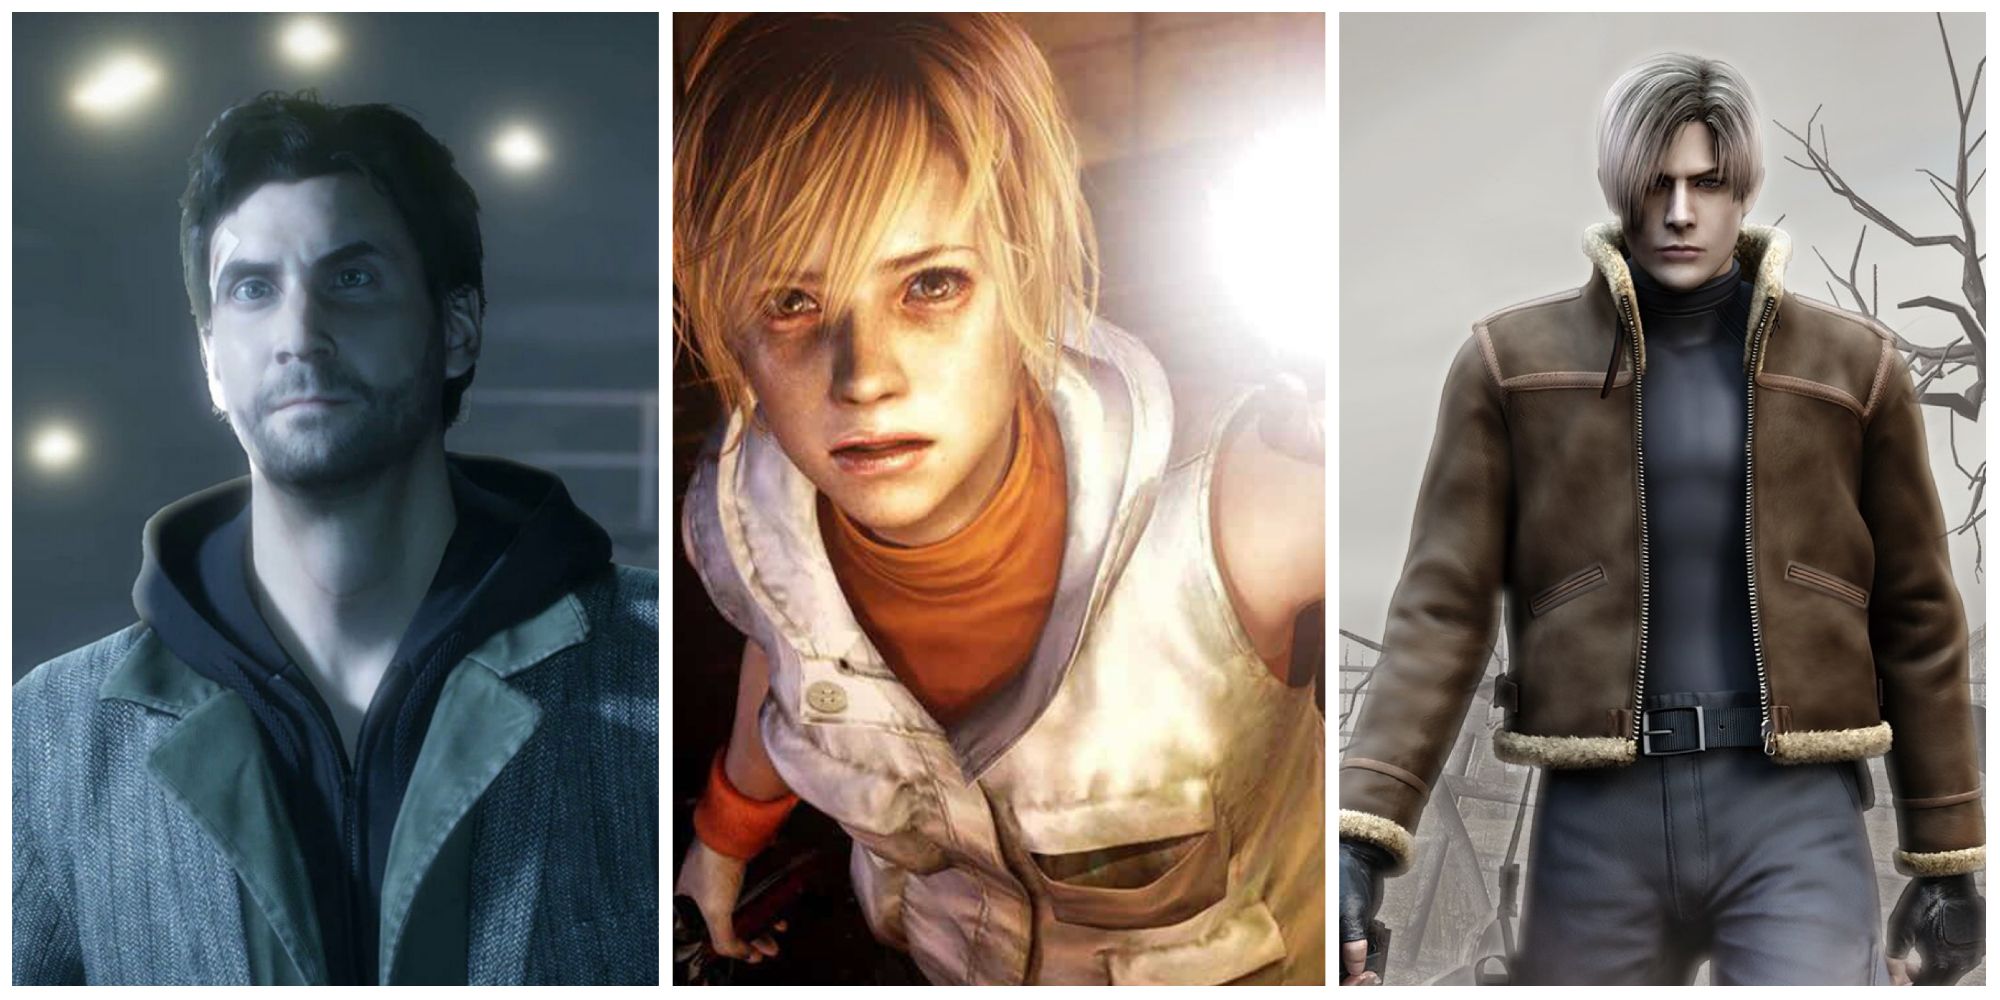 A collage of horror protagonists including Alan Wake, Heather Mason, and Leon Kennedy